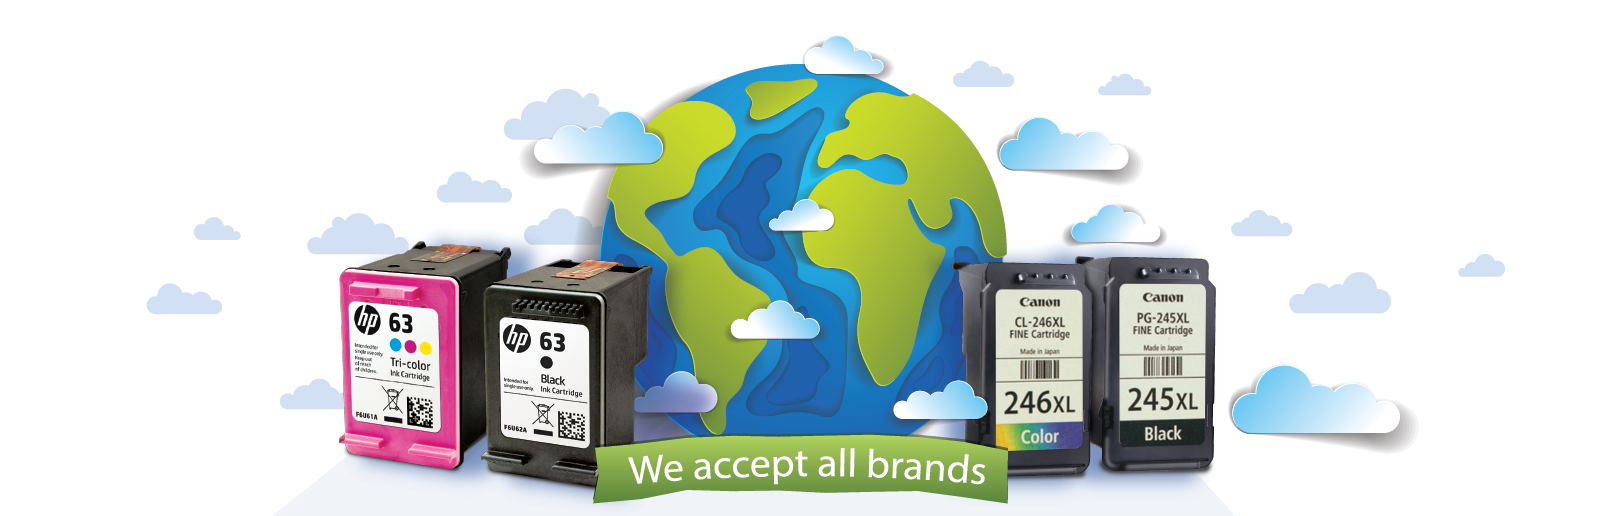 we recycle all brands banner